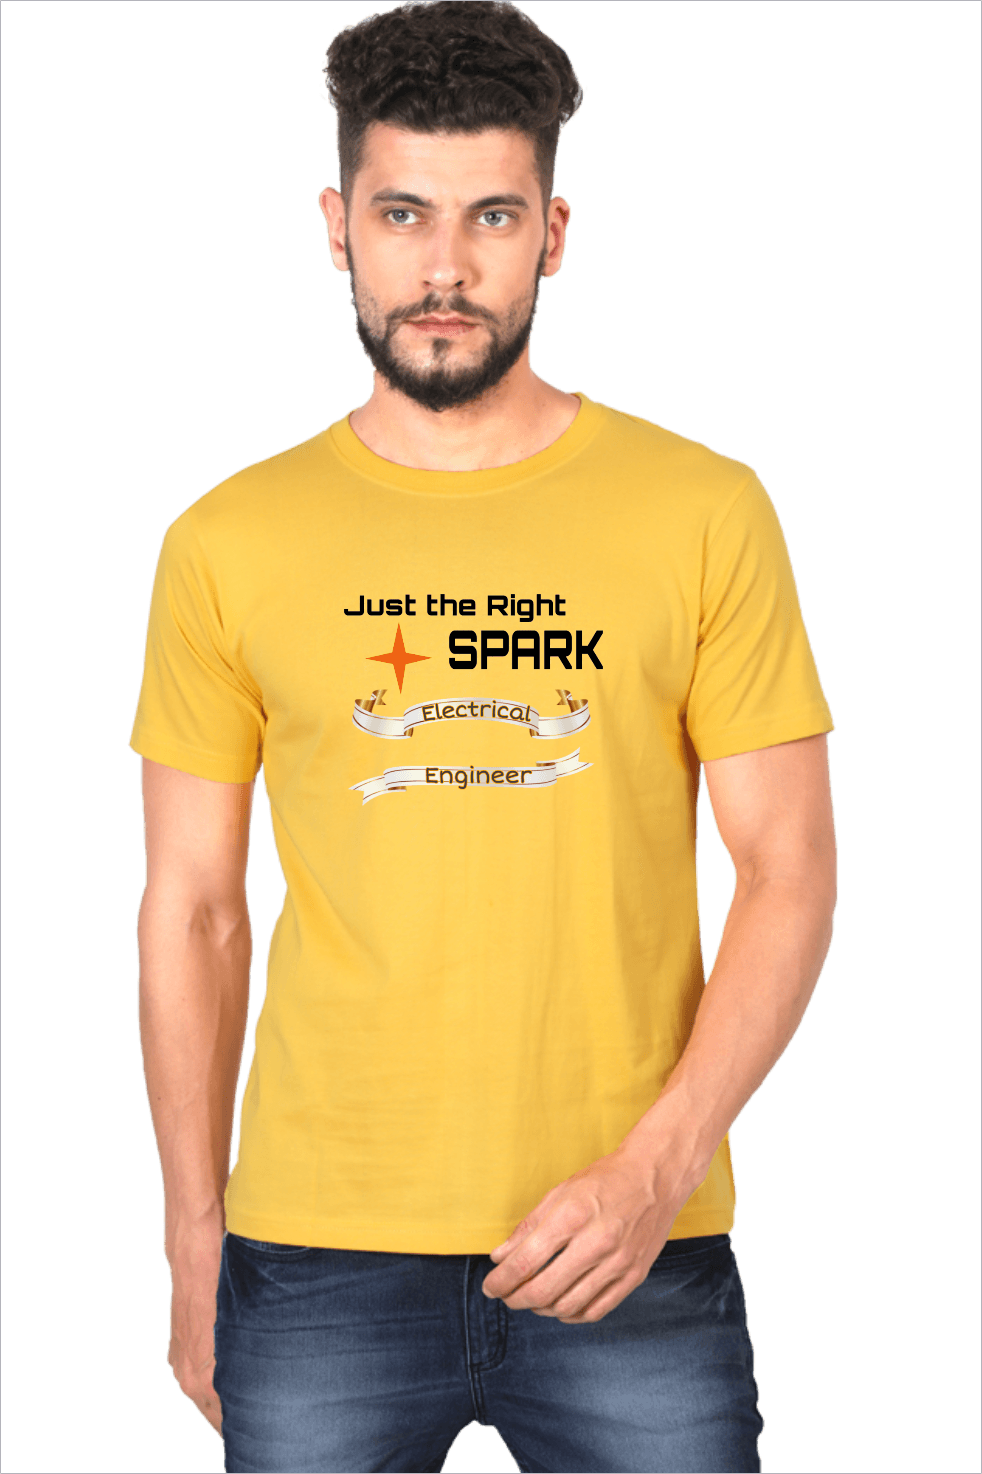 Golden Yellow Cotton Tshirt for Electrical Engineers